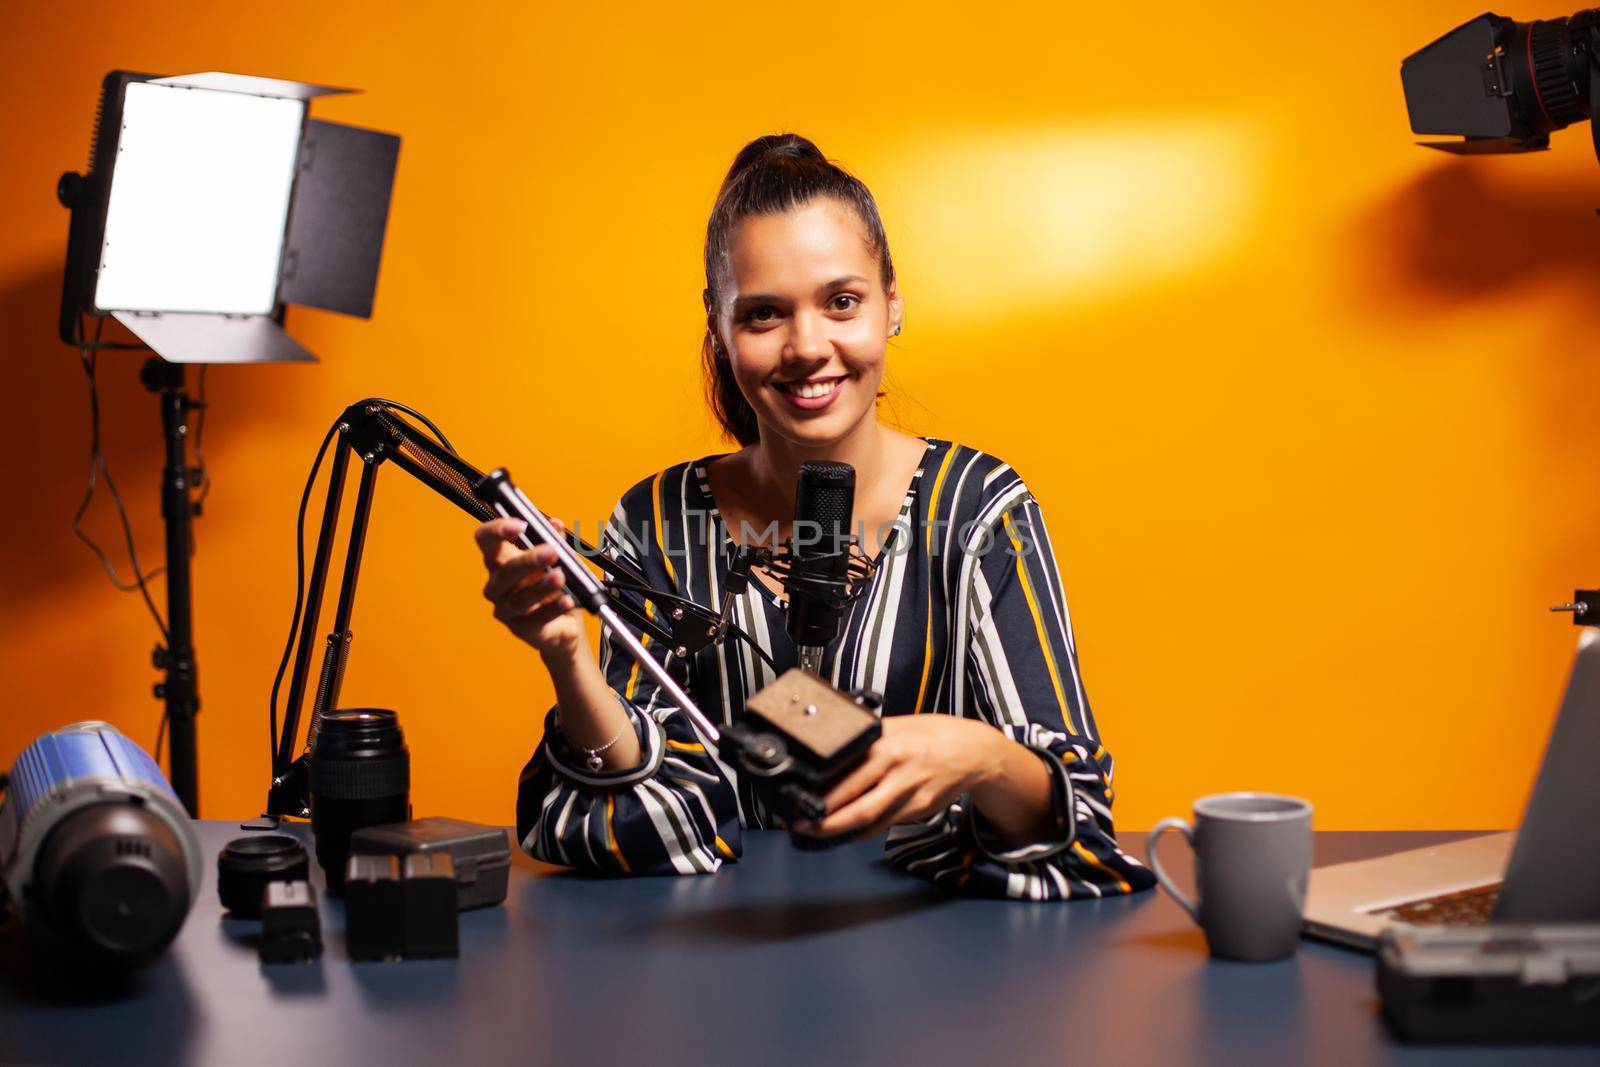 Holding videography equipment and recording podcast. Social media star making online internet content about video equipment for web subscribers and distribution, film